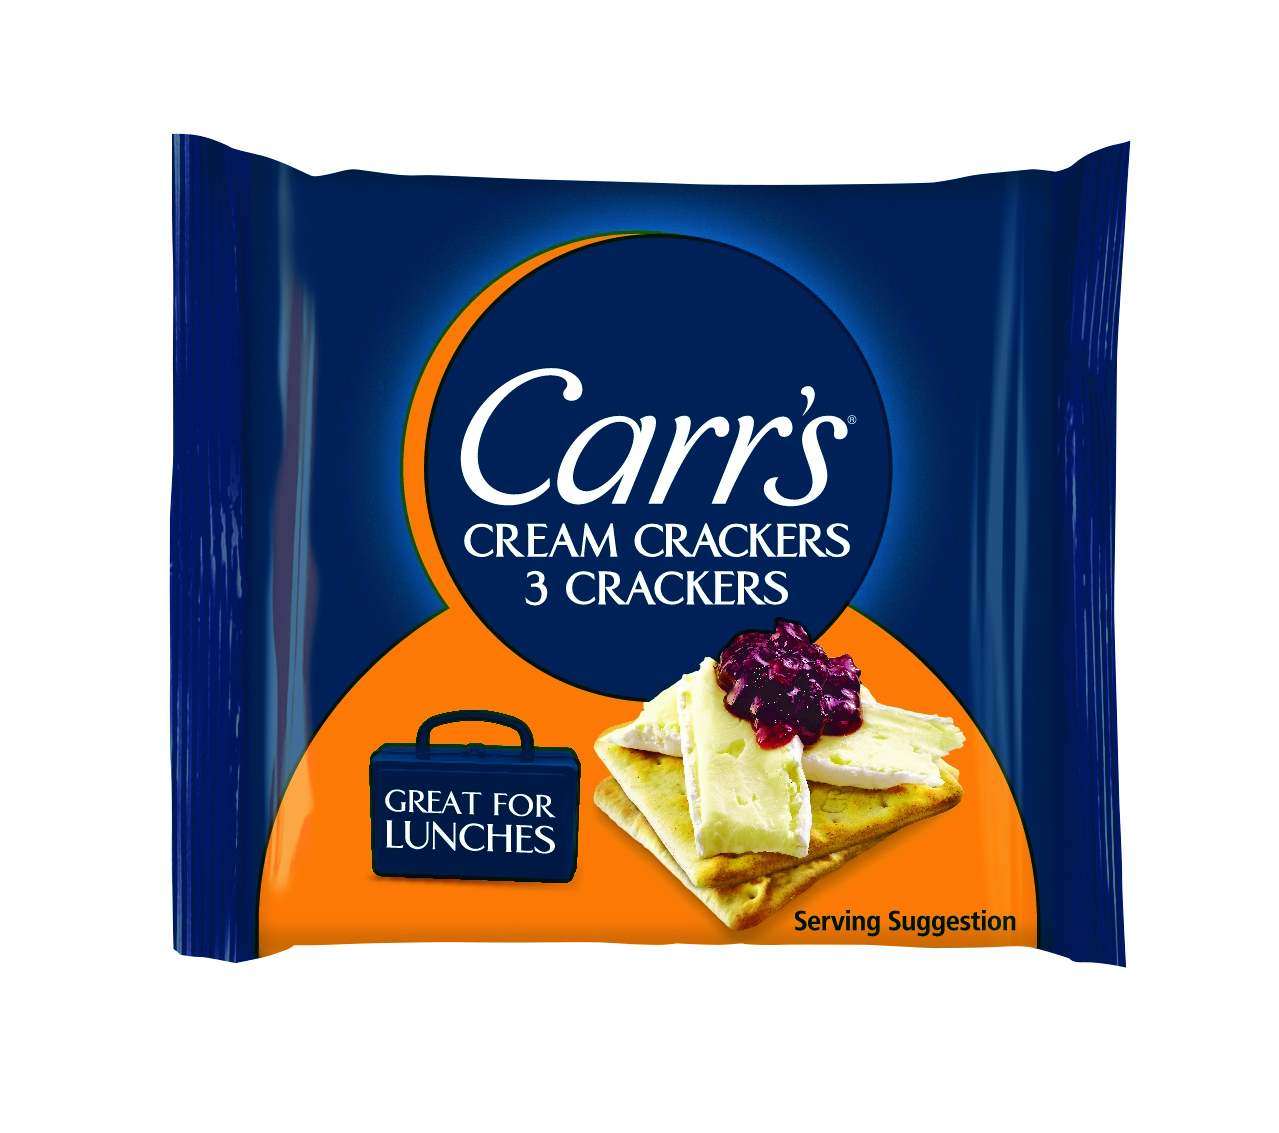 Carr’s Cream Crackers are available in three formats; a 200g pack, 300g pack and Snack Pack